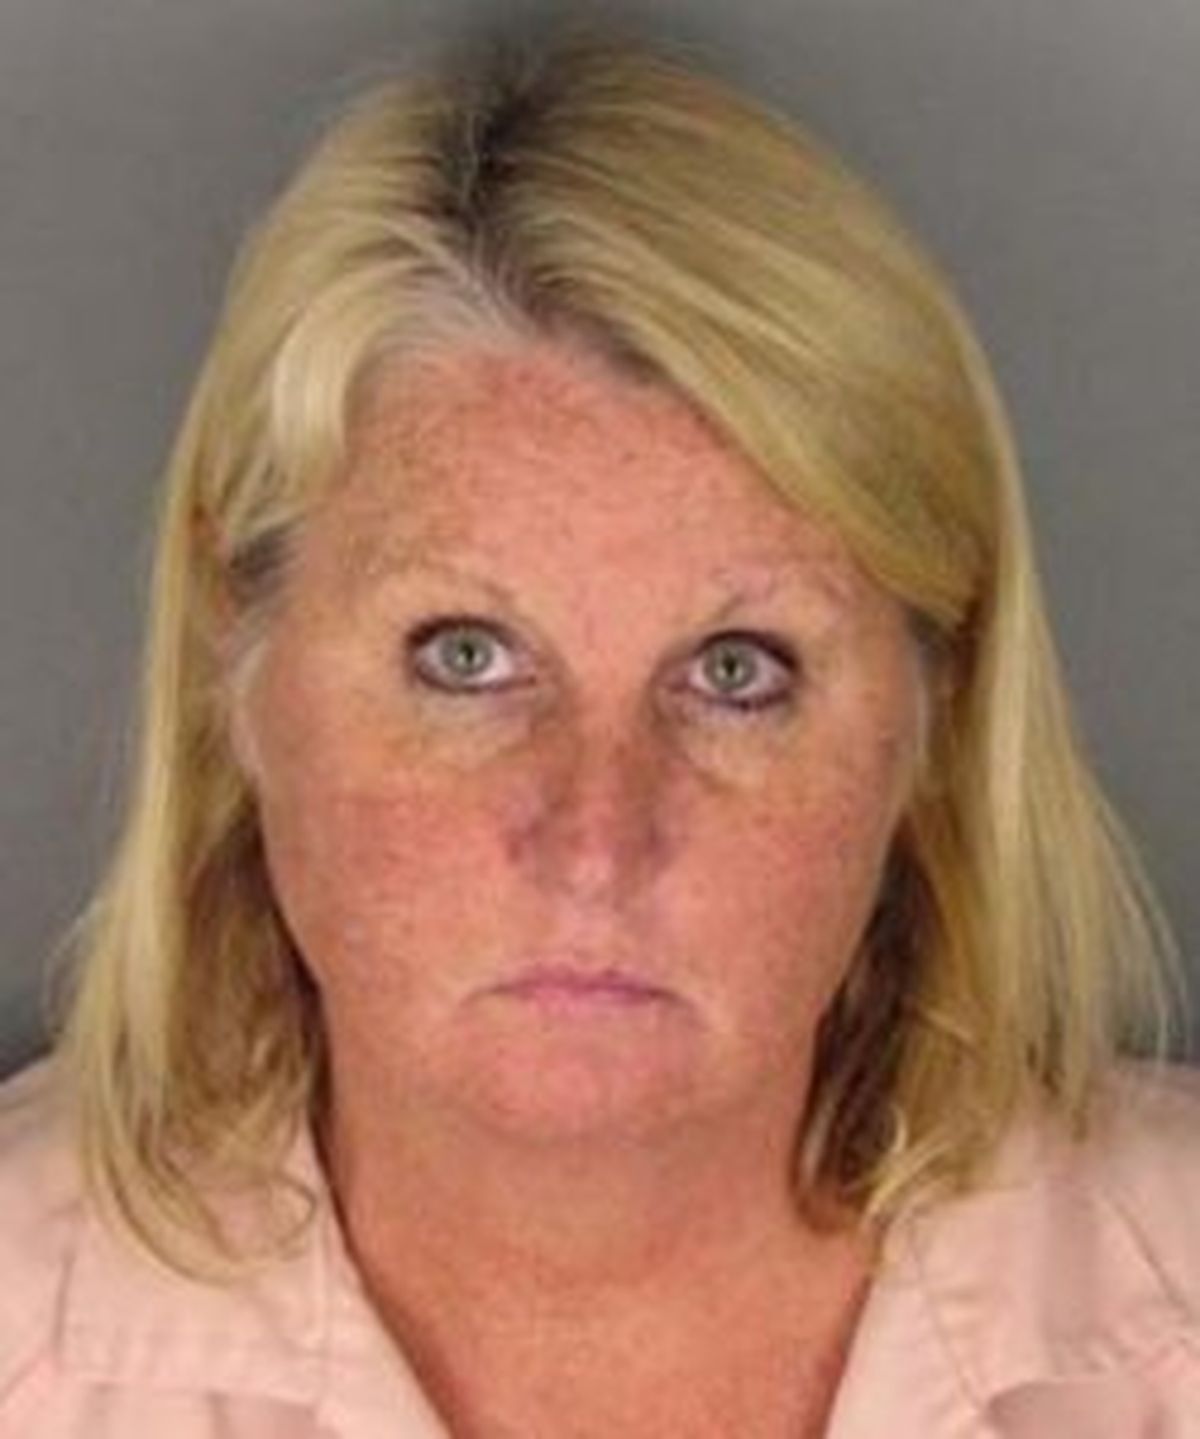  Cynthia Van Holland, 47, is suspected of being the "Bad Hair Bandit." (Placer County Sheriff